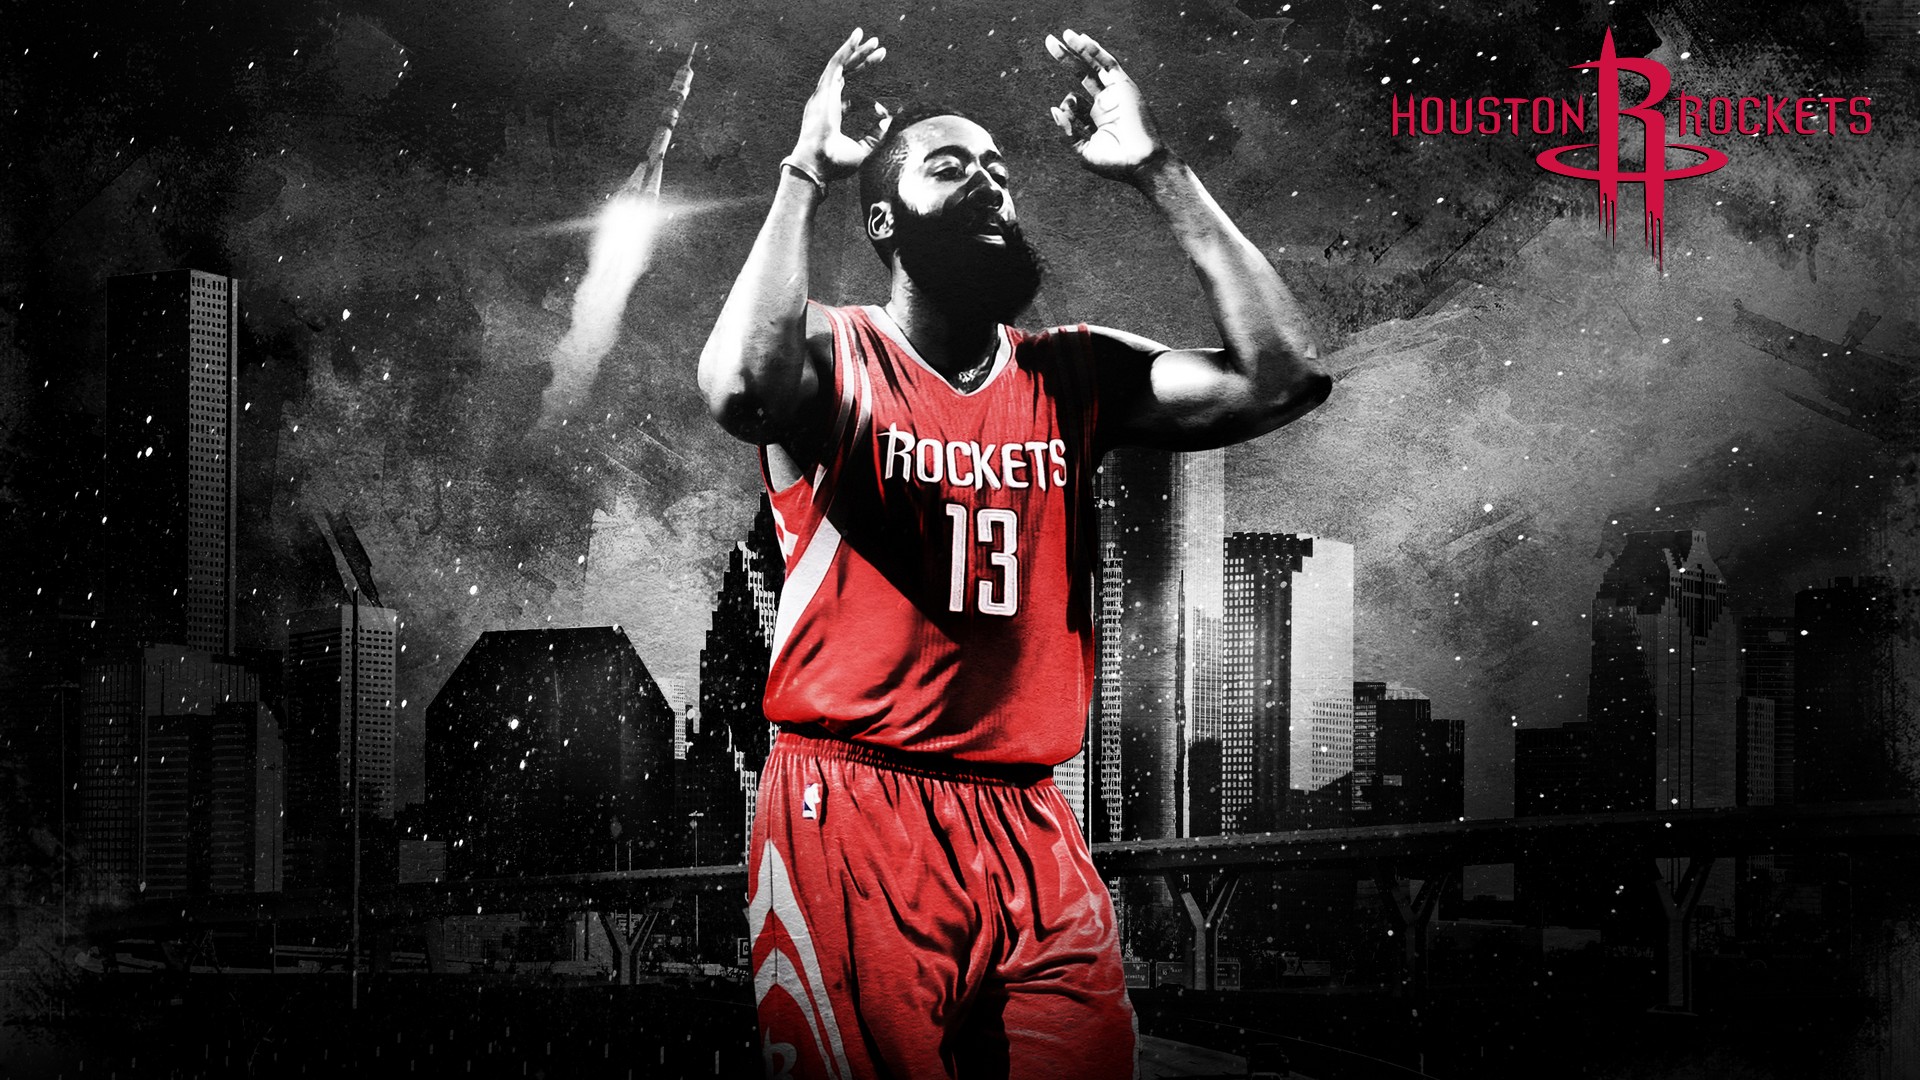 Wallpapers James Harden Beard with image dimensions 1920x1080 pixel. You can make this wallpaper for your Desktop Computer Backgrounds, Windows or Mac Screensavers, iPhone Lock screen, Tablet or Android and another Mobile Phone device